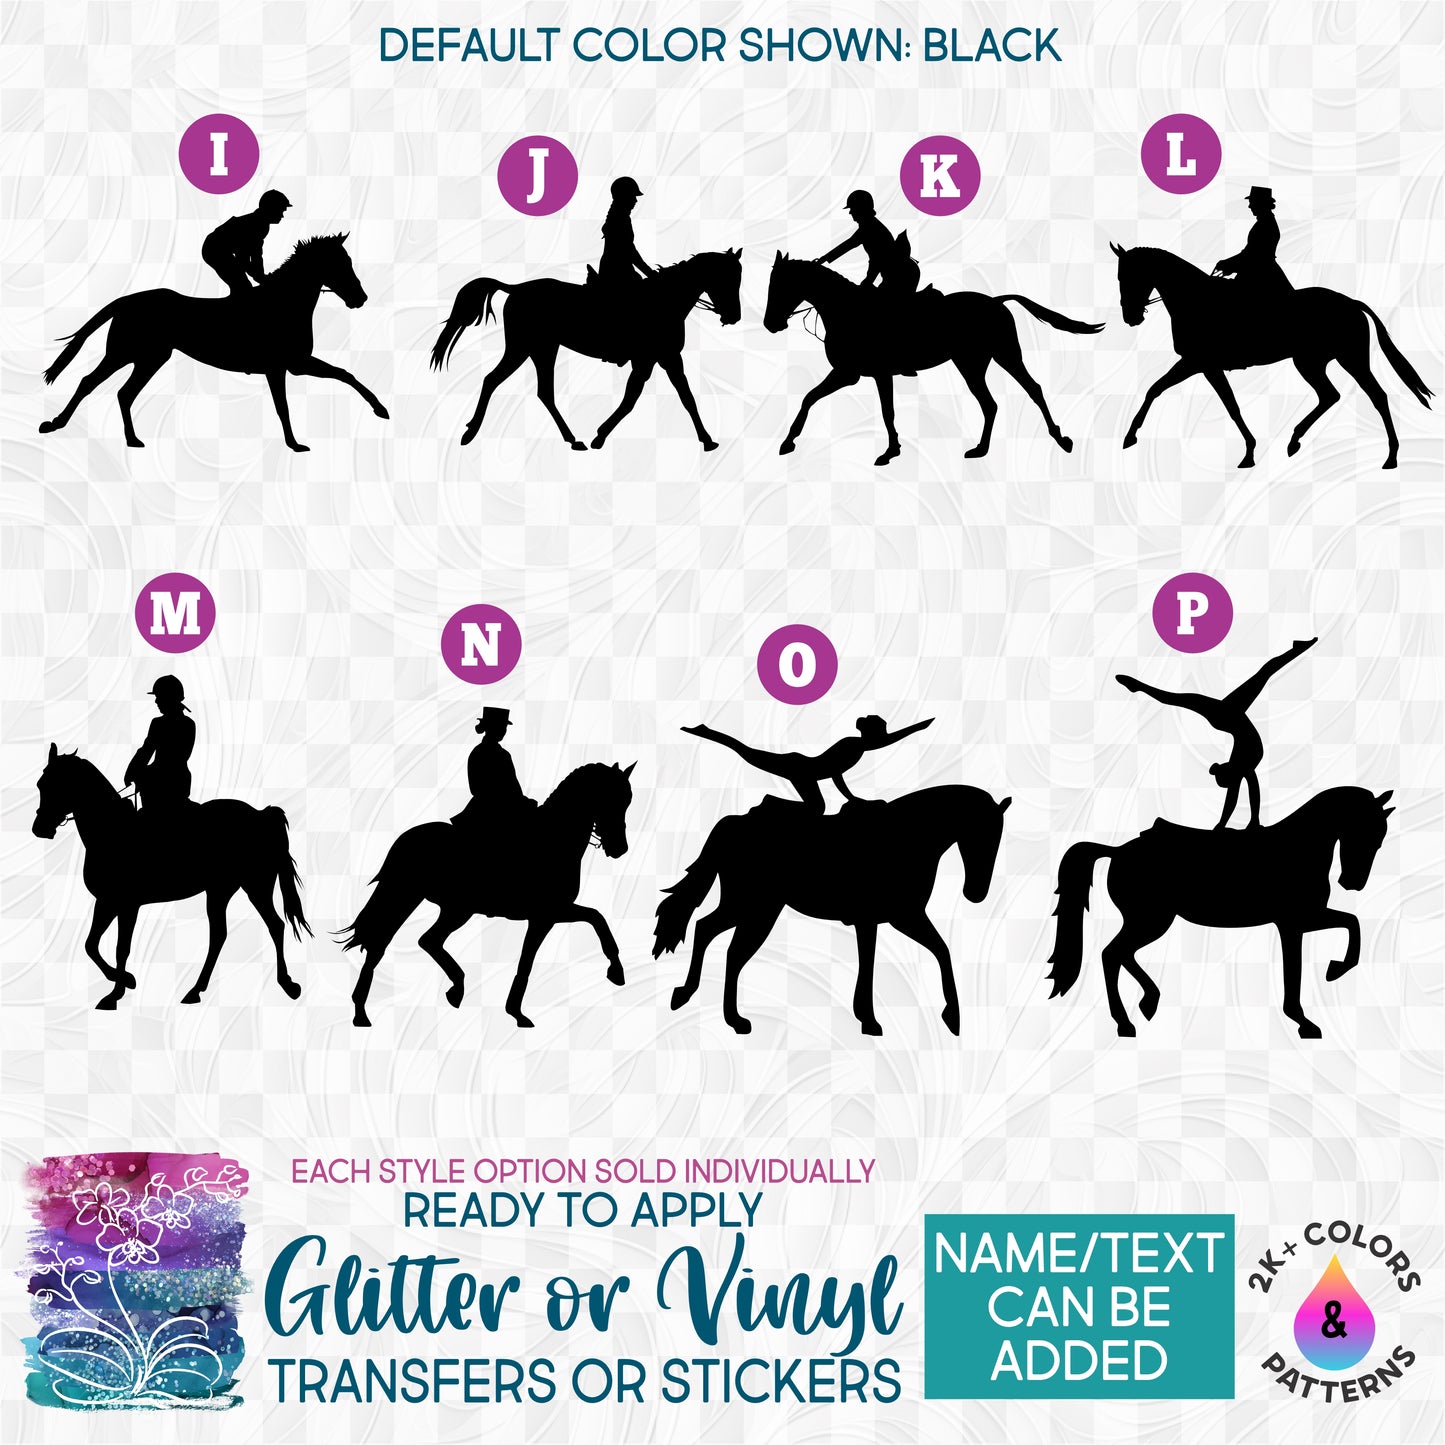 (s141) Equestrian Horses Horse Rider Racehorse Vaulting Glitter or Vinyl Iron-On Transfer or Sticker